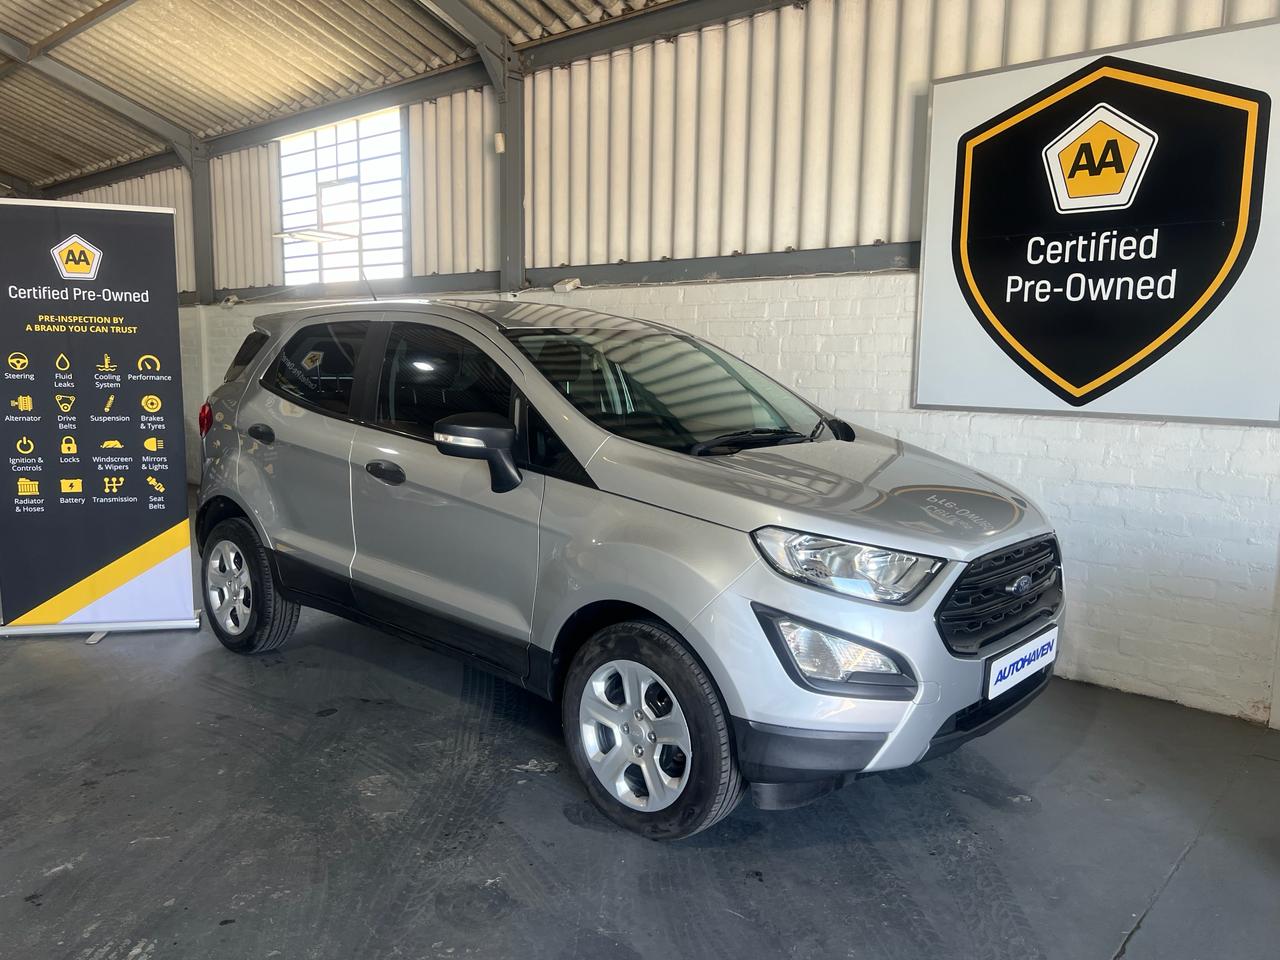 2019 Ford EcoSport 1.5TiVCT Ambiente For Sale